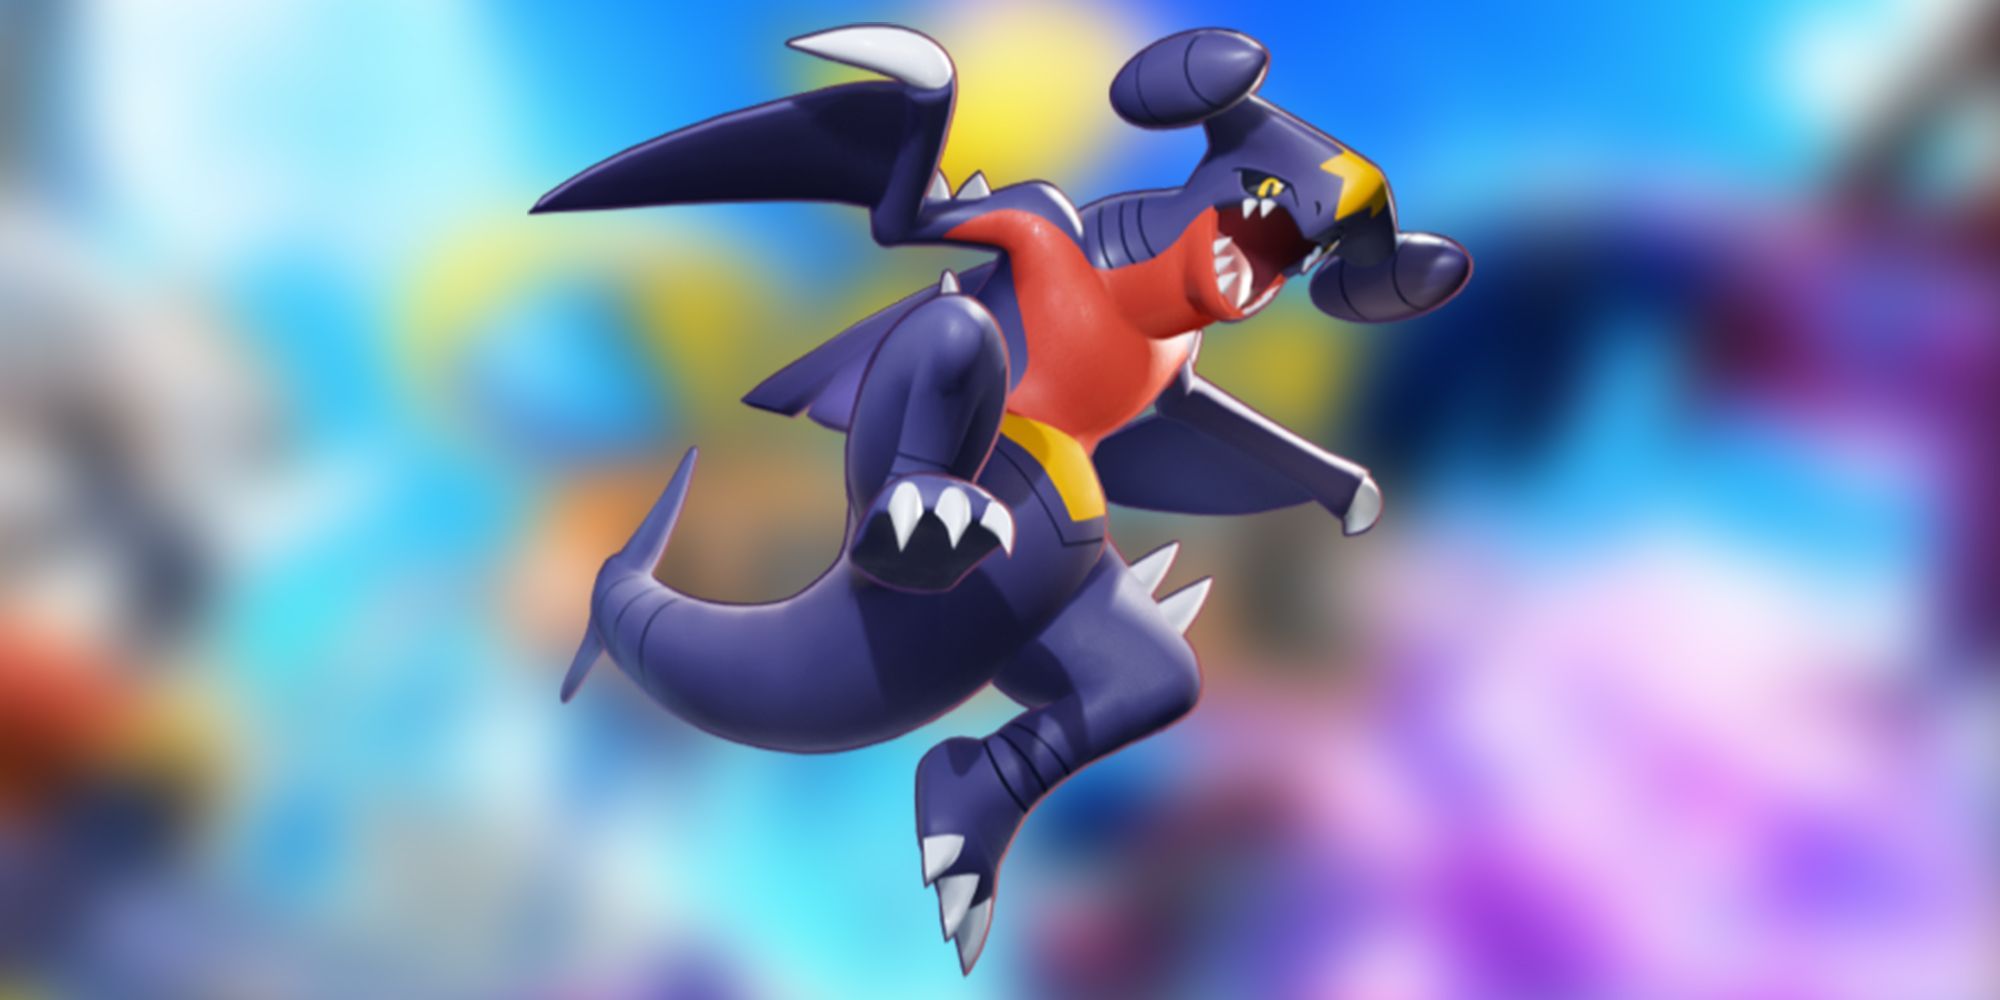 Garchomp leaps in the air in Pokemon.